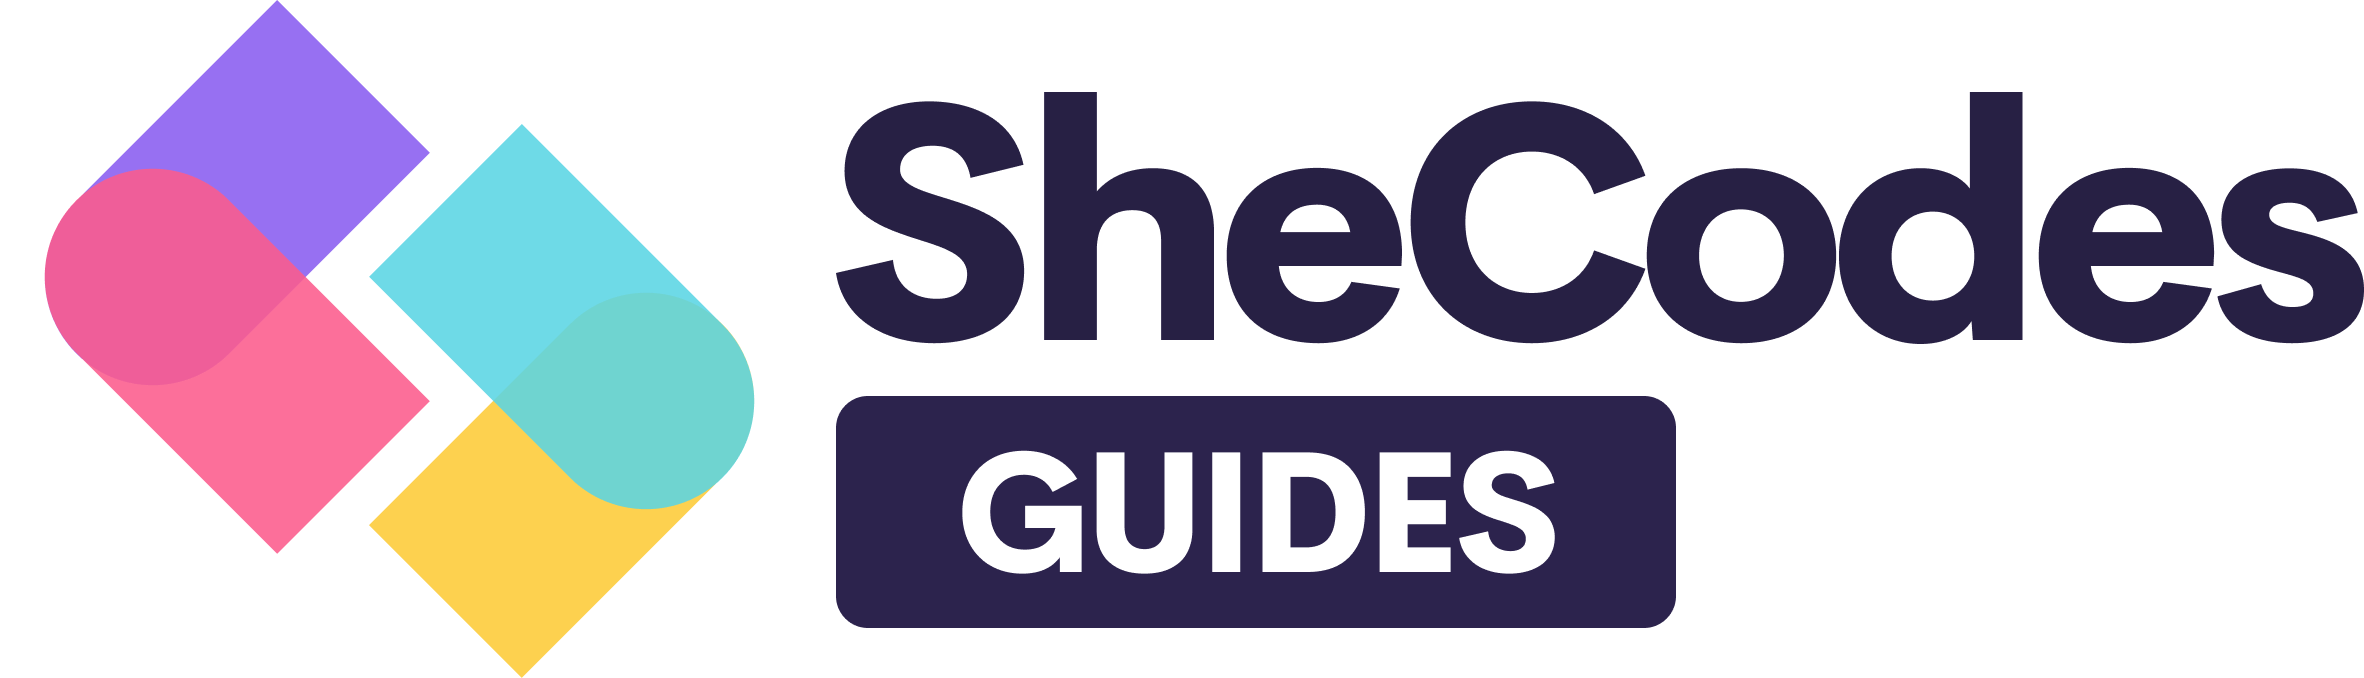 SheCodes Guides